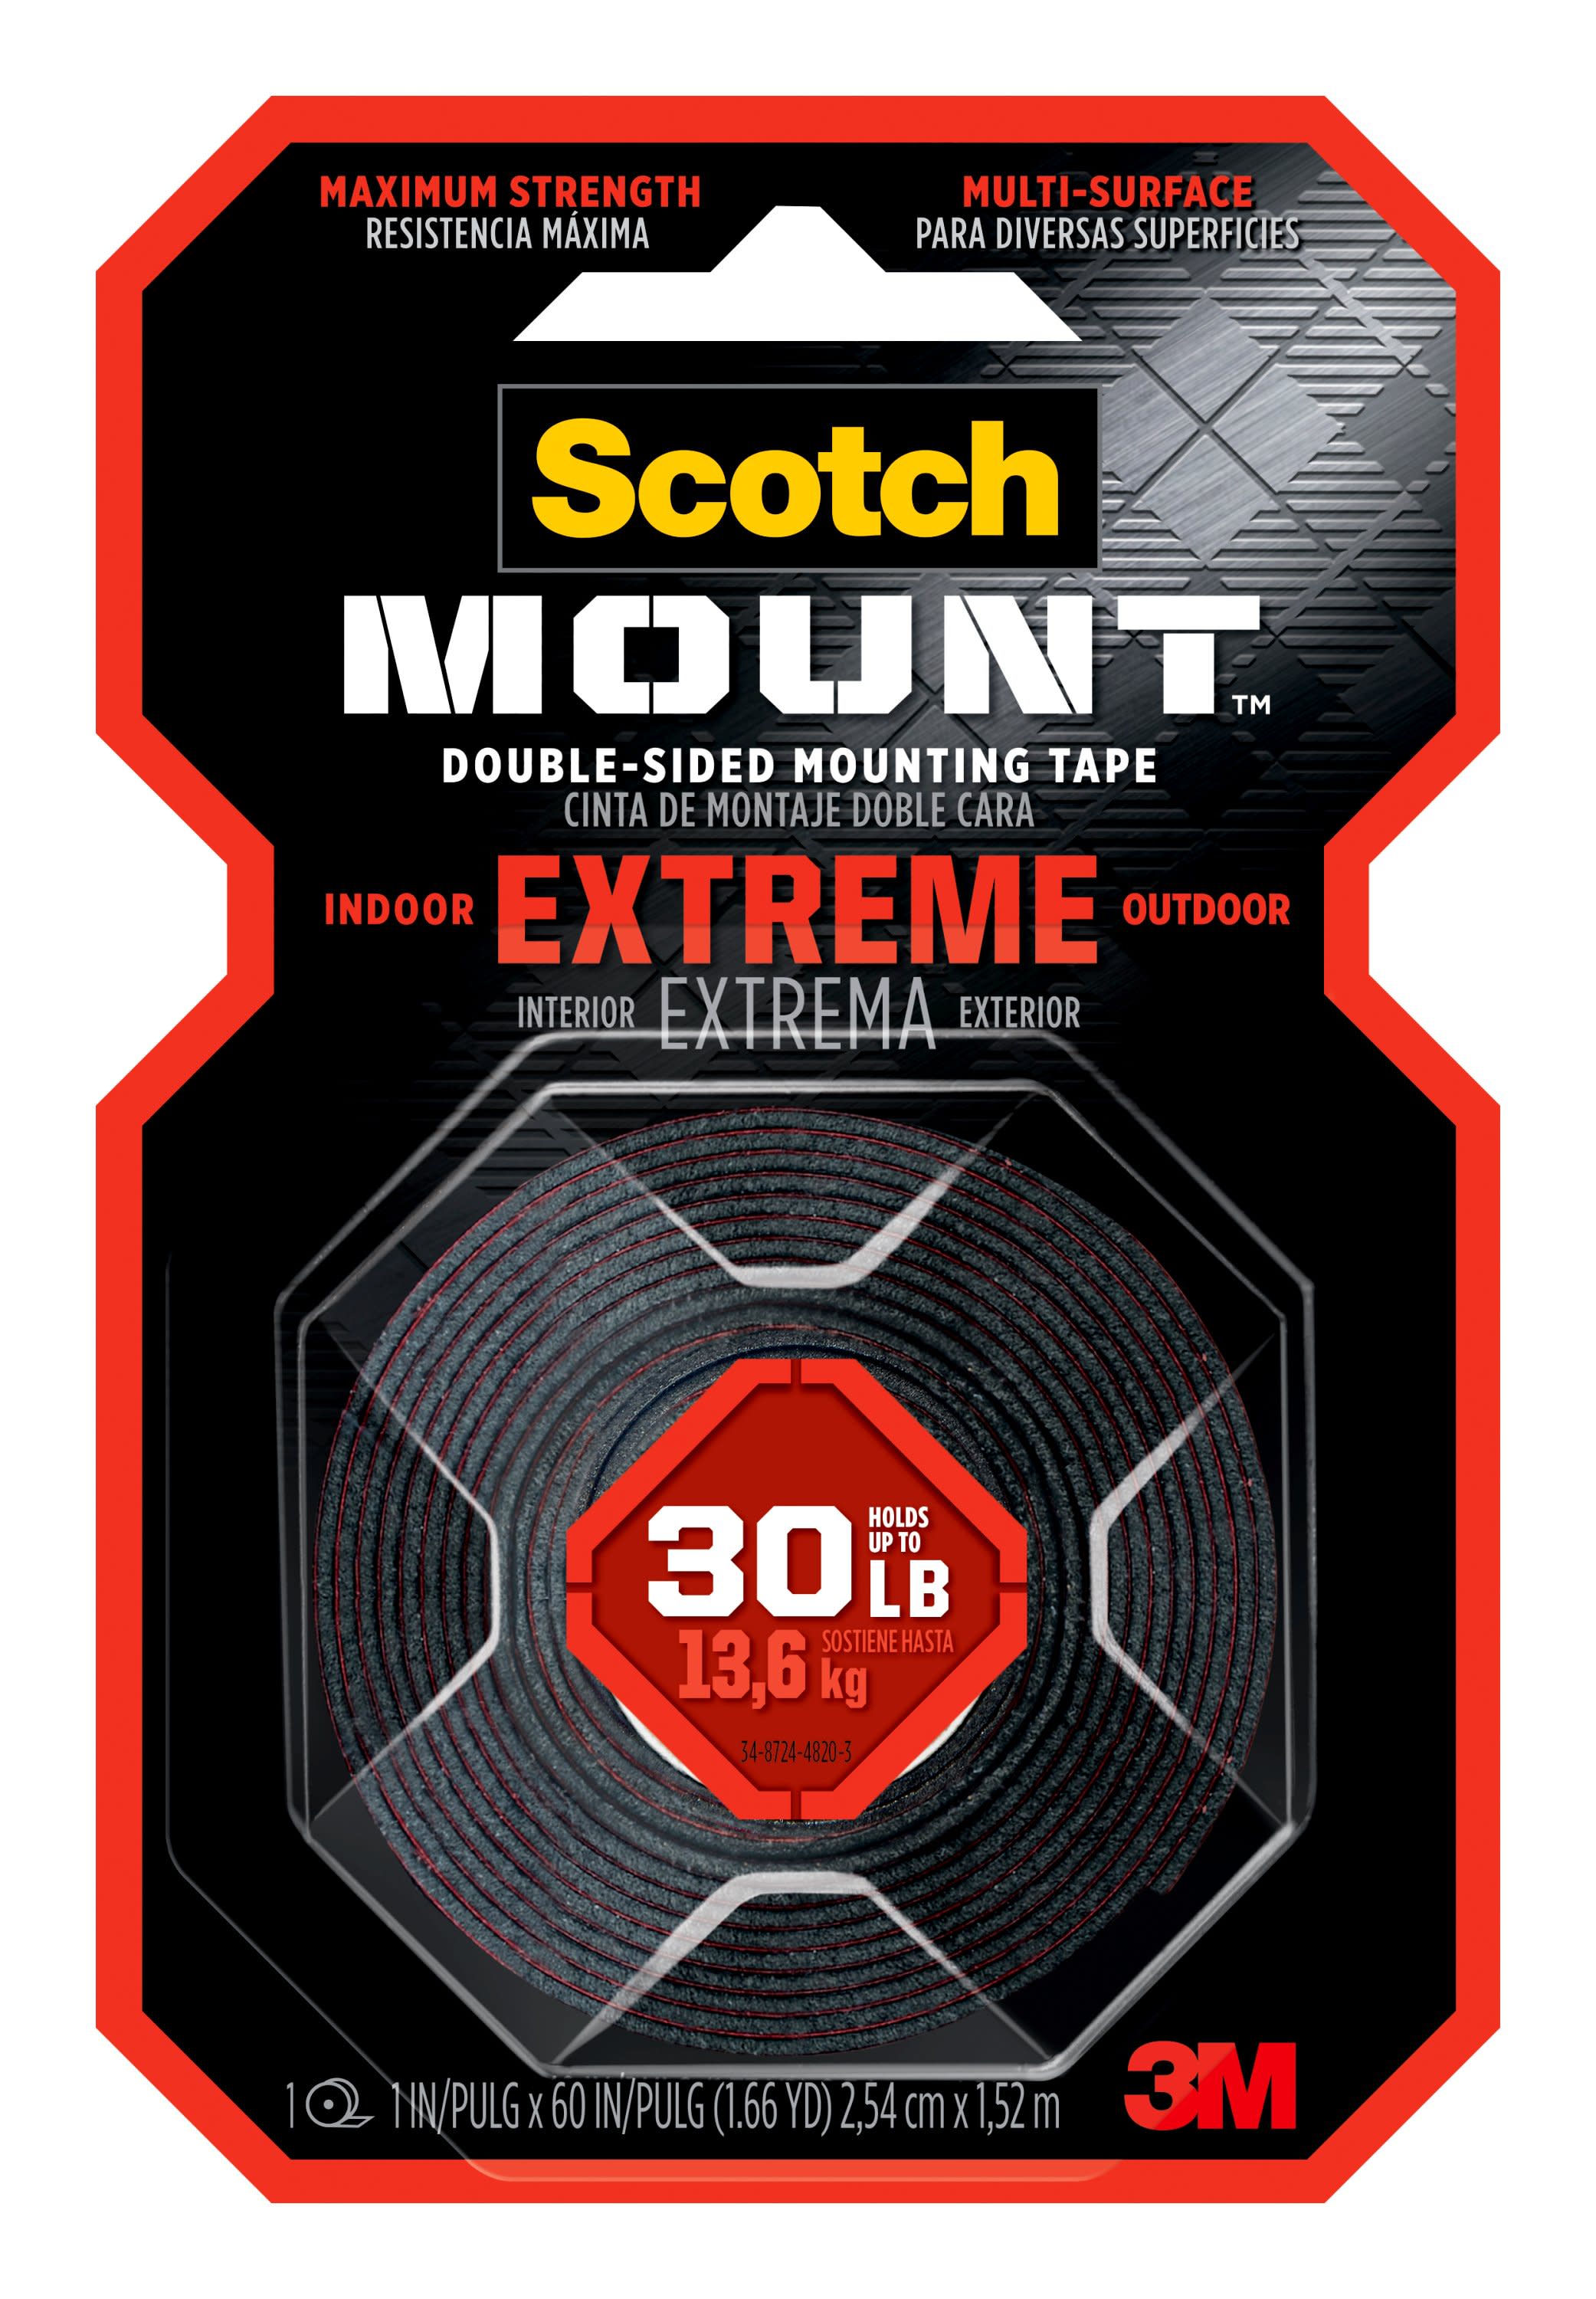 Scotch-Mount Indoor Double-Sided Mounting Tape 0.75-in x 29.17-ft